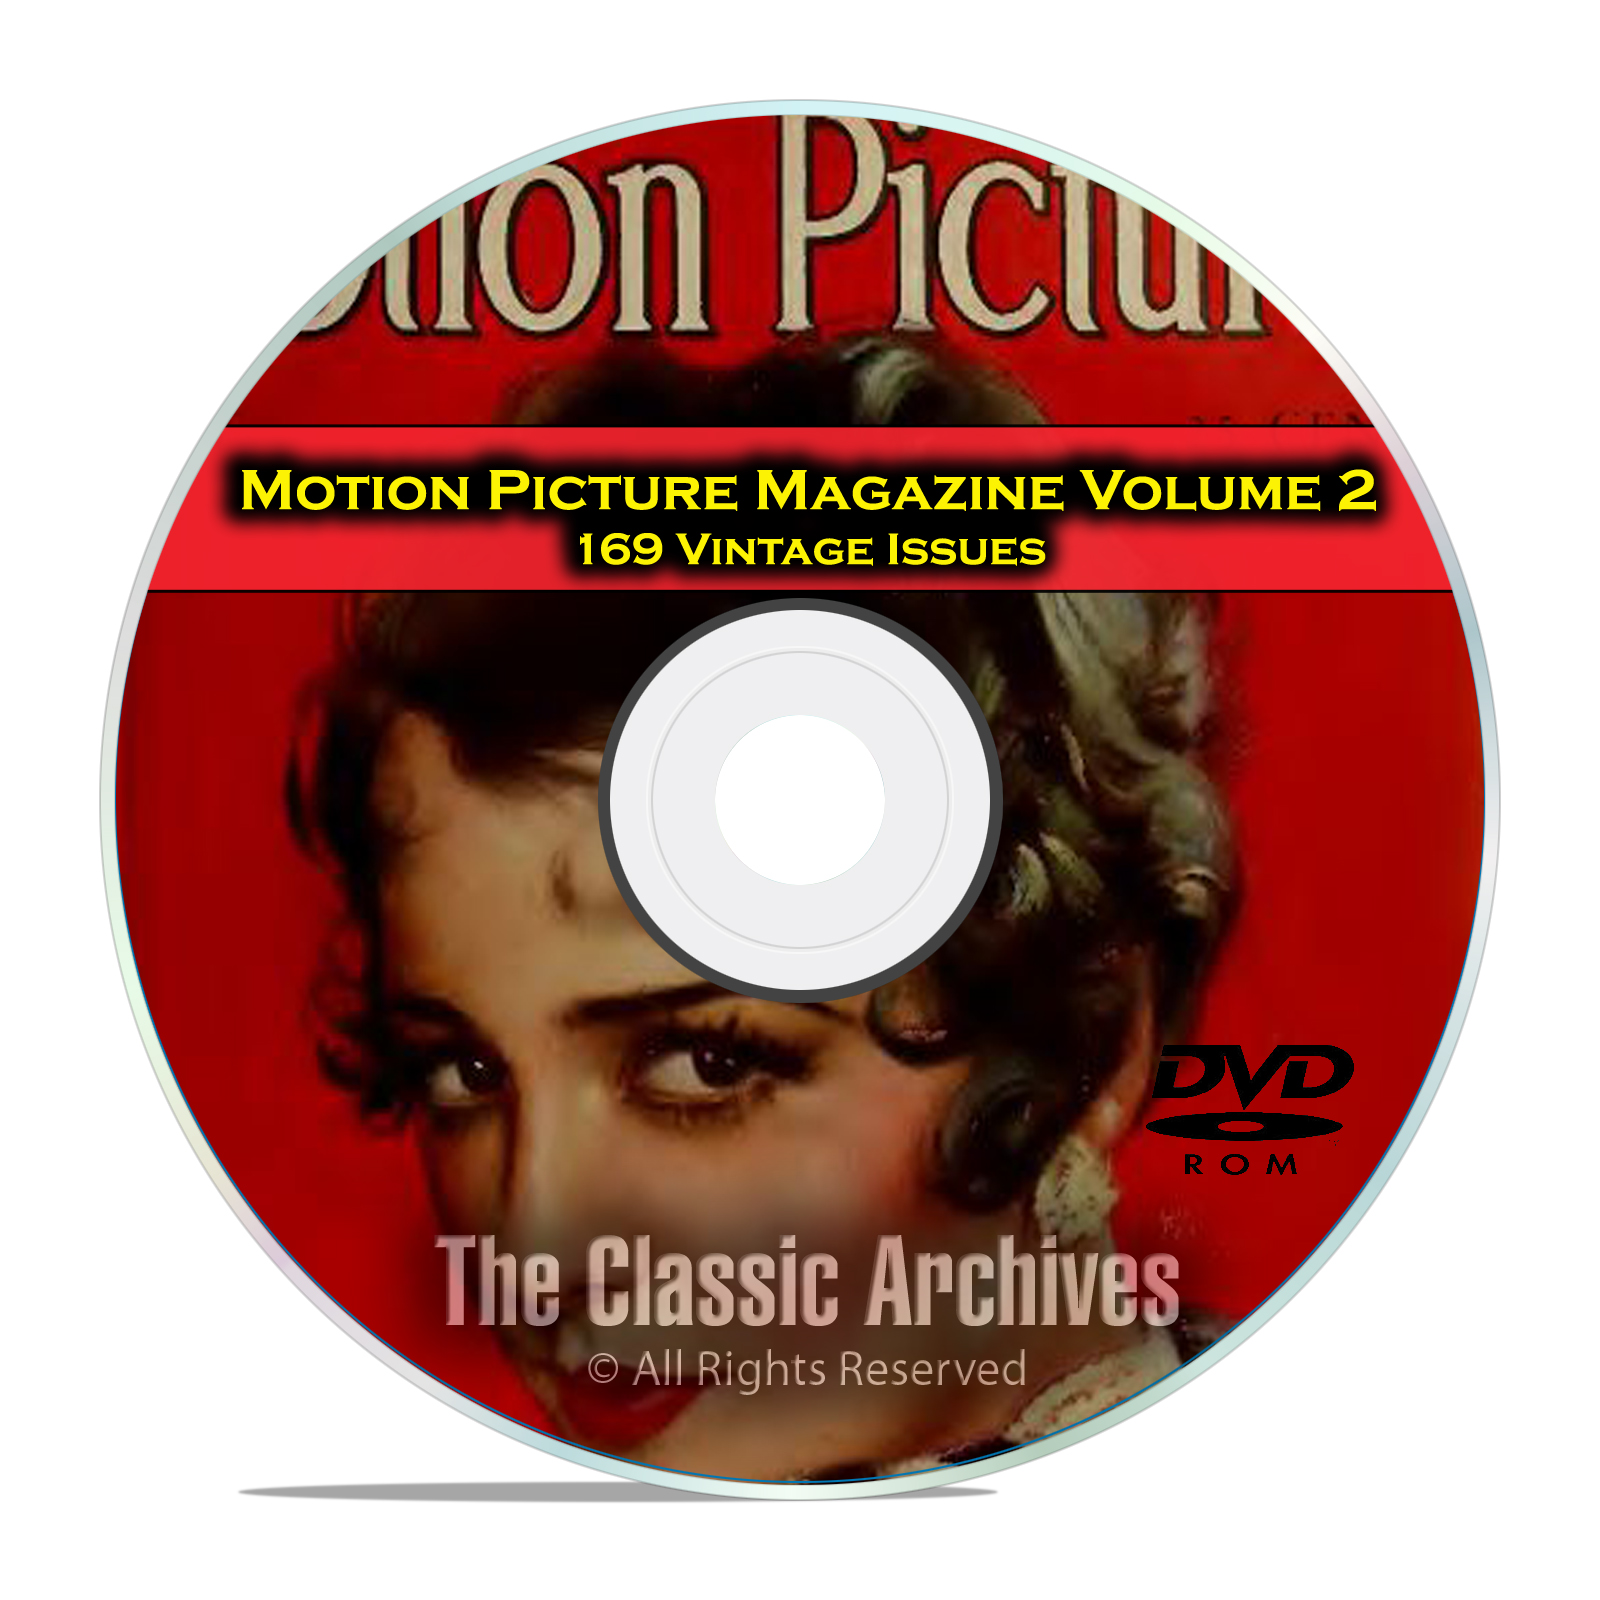 Motion Picture Movie Magazine, Volume 2, 169 Issues, 1925 - 1941, DVD